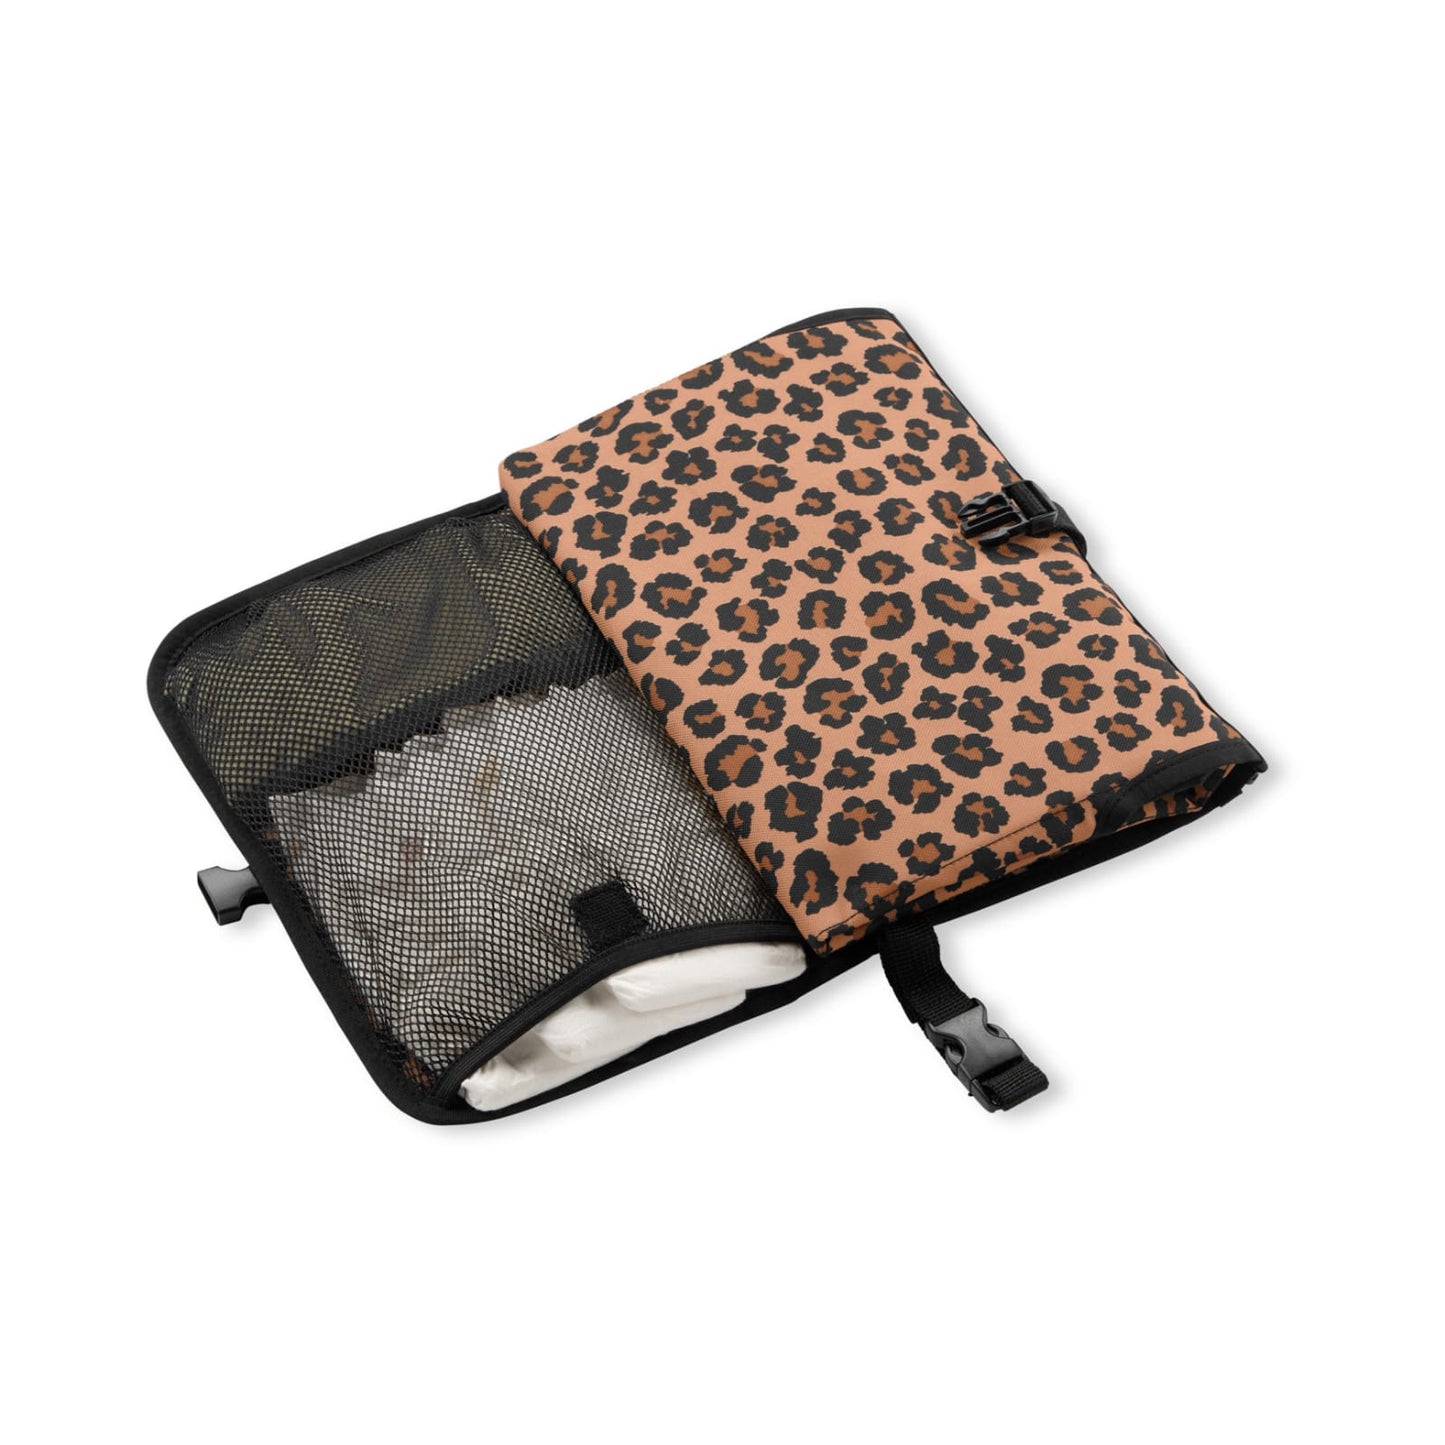 Pronto Changing Station - Classic Leopard